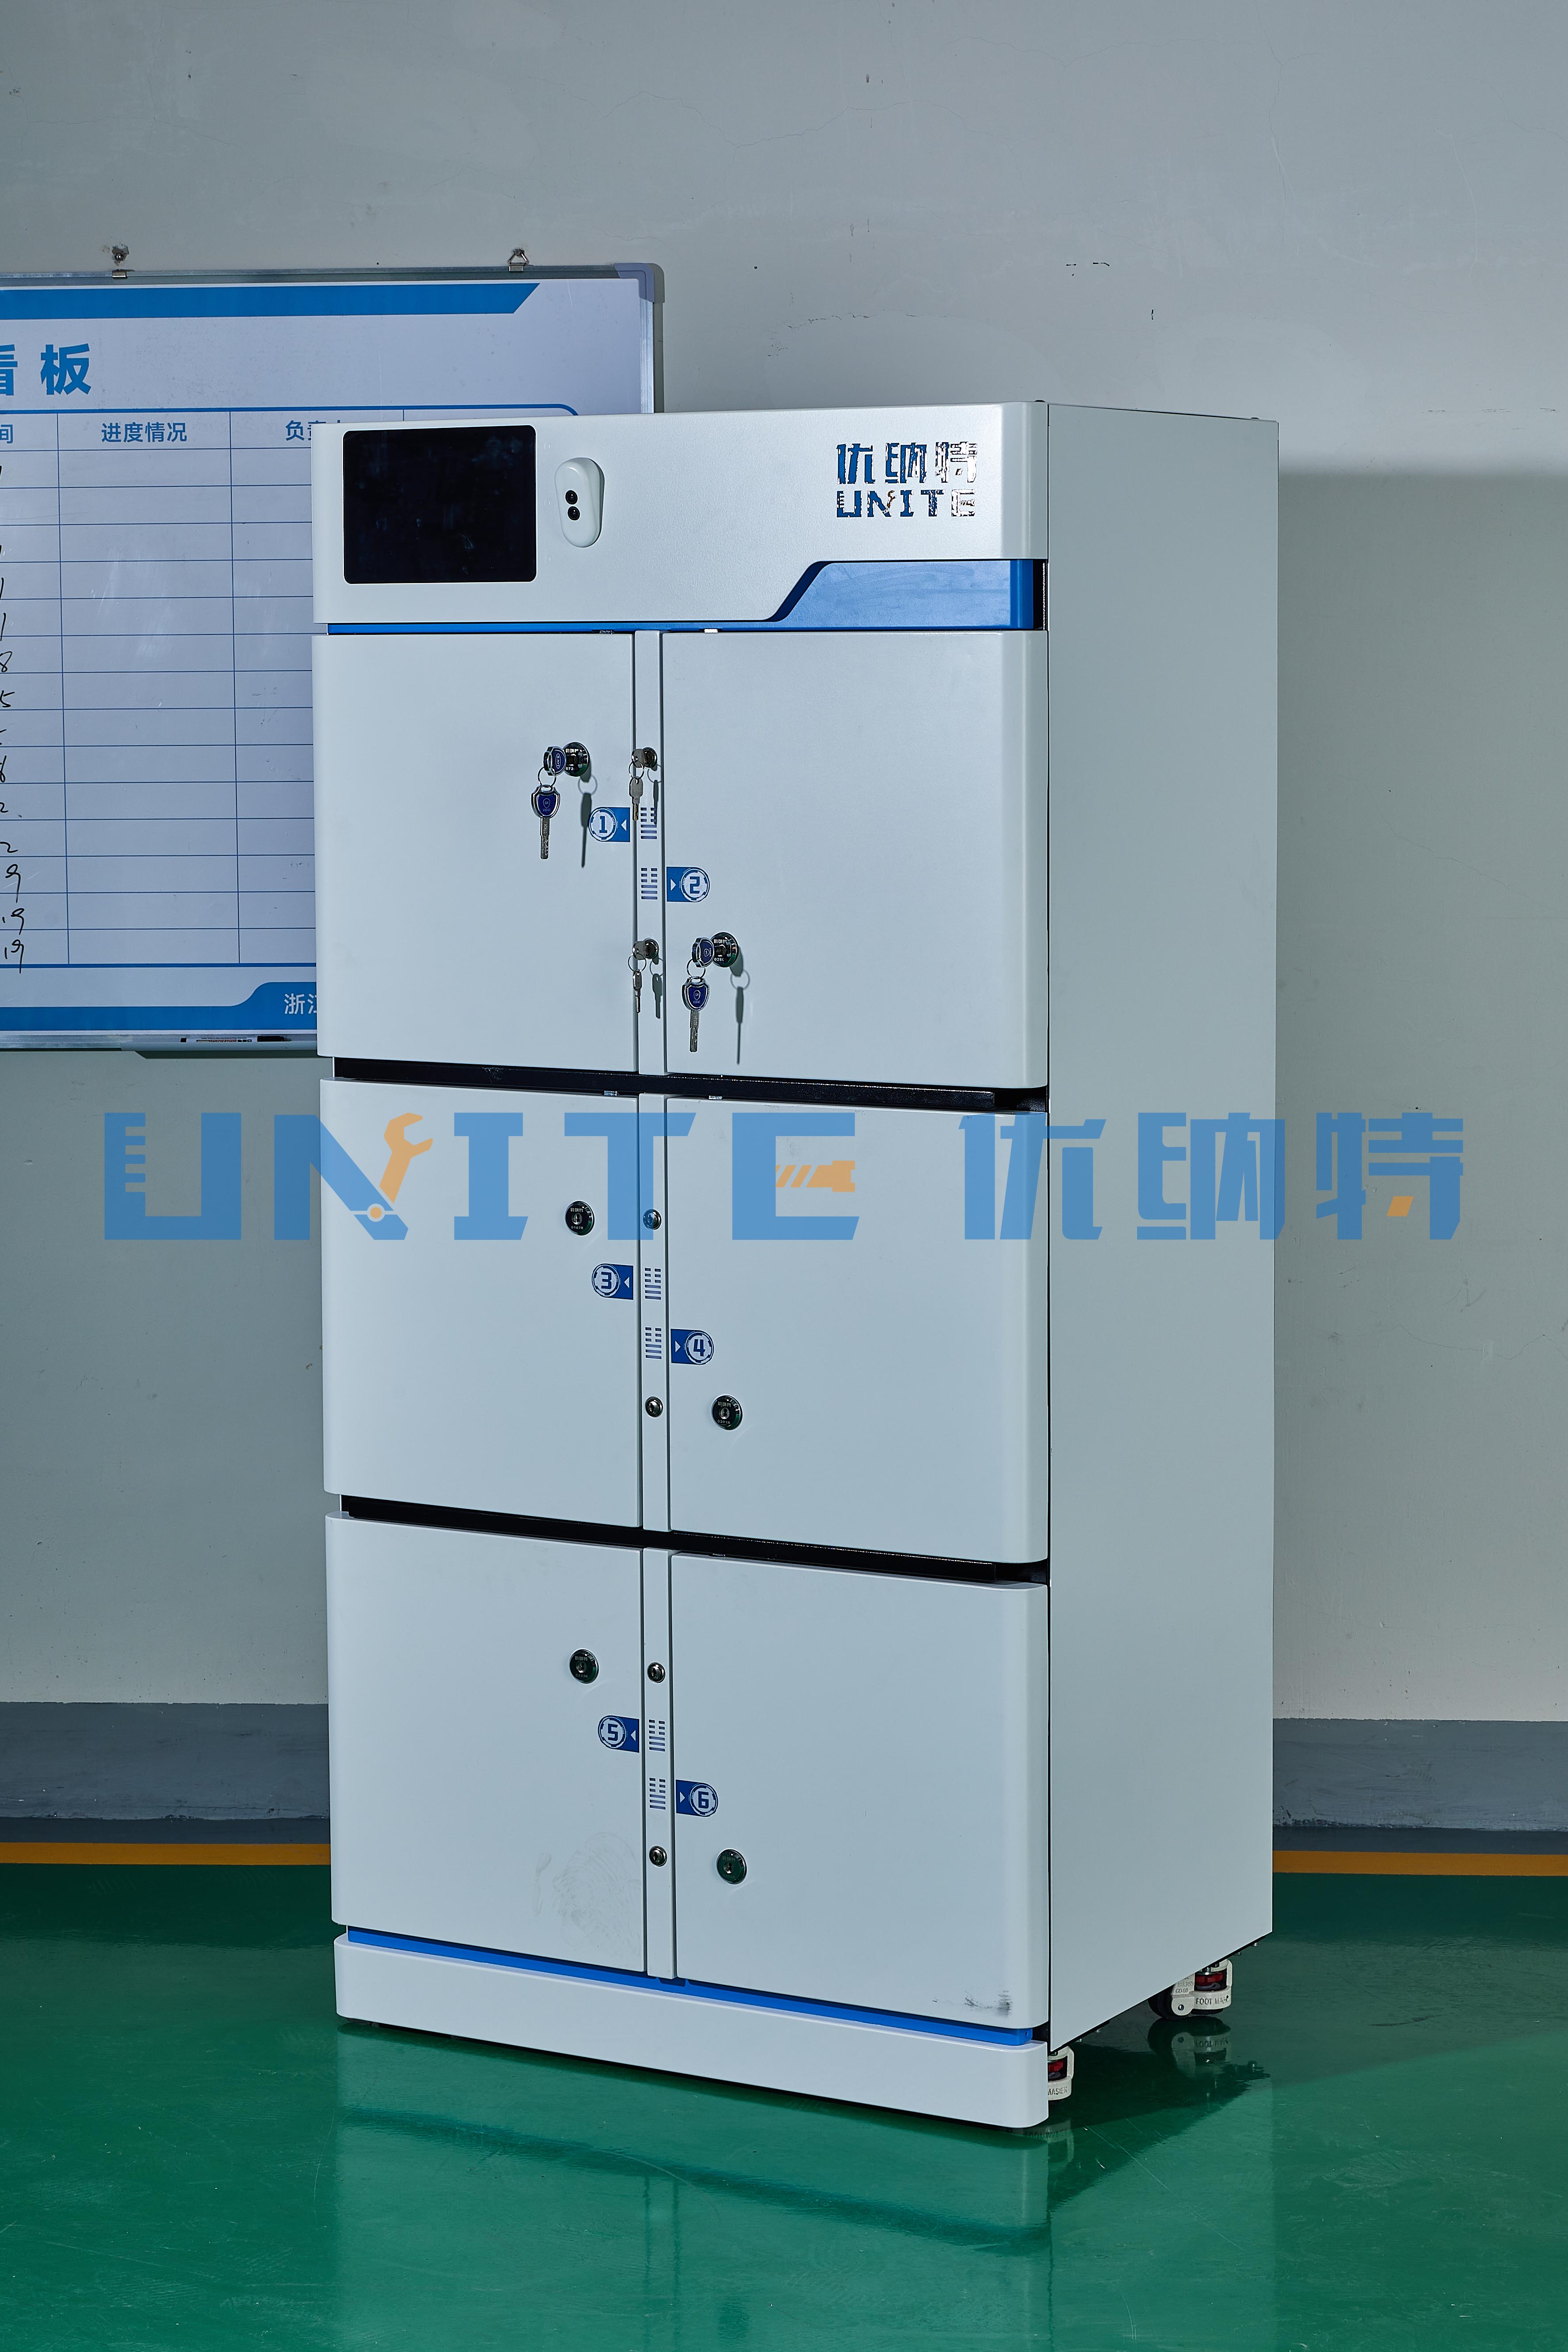 Unite Usample R6.2 Six-zone Matrix IOT Cabinets For Hazardous Chemicals Management for storage of reagents, consumables